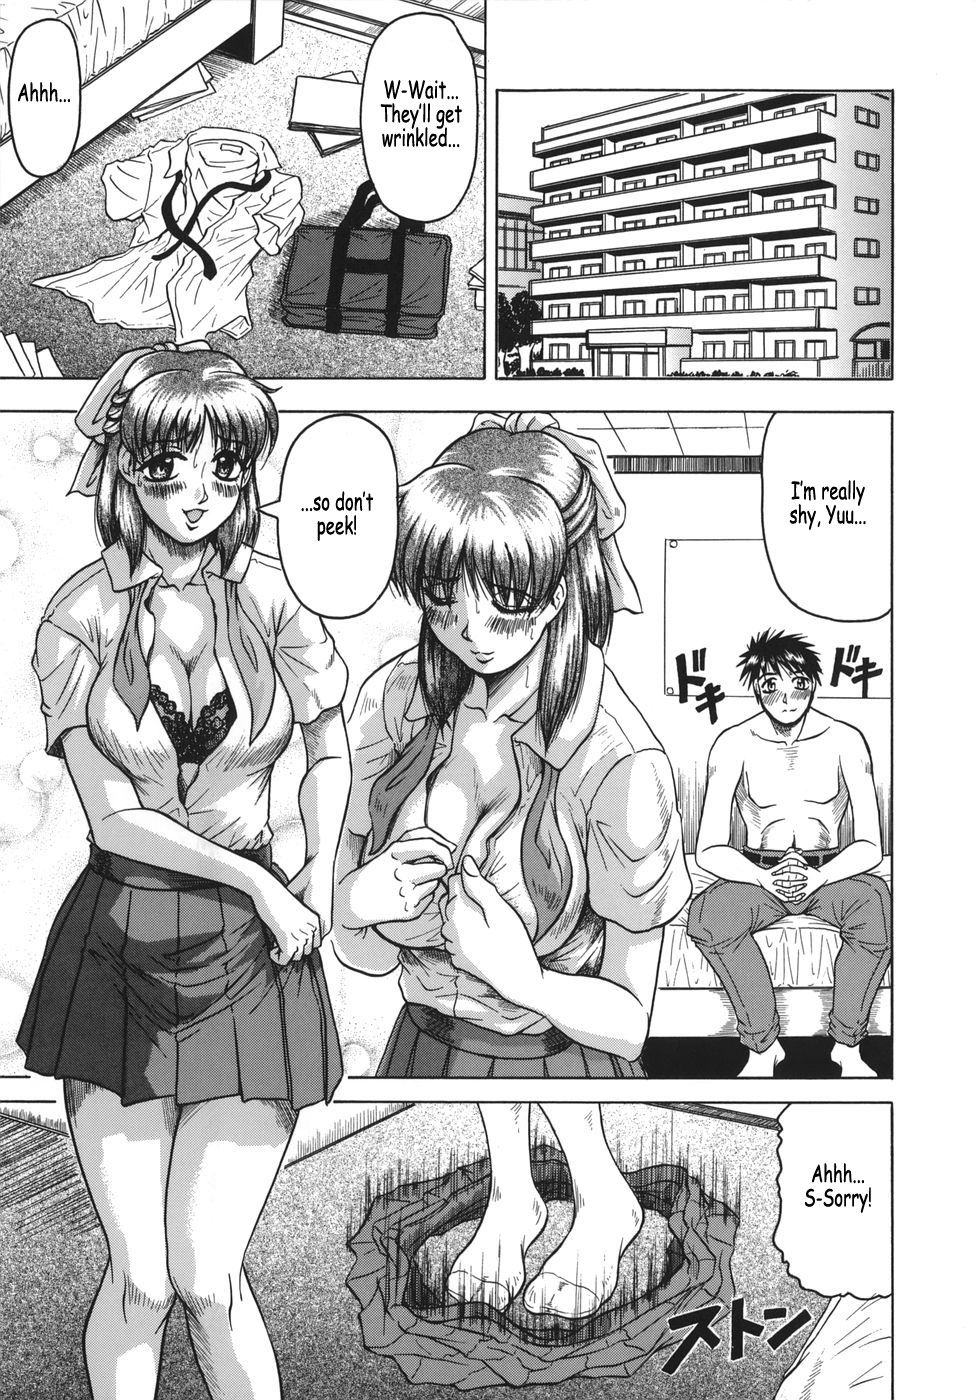 [Jamming] Onee-chan ni Omakase - Leave to Your Elder Sister [English] [Coff666] page 9 full